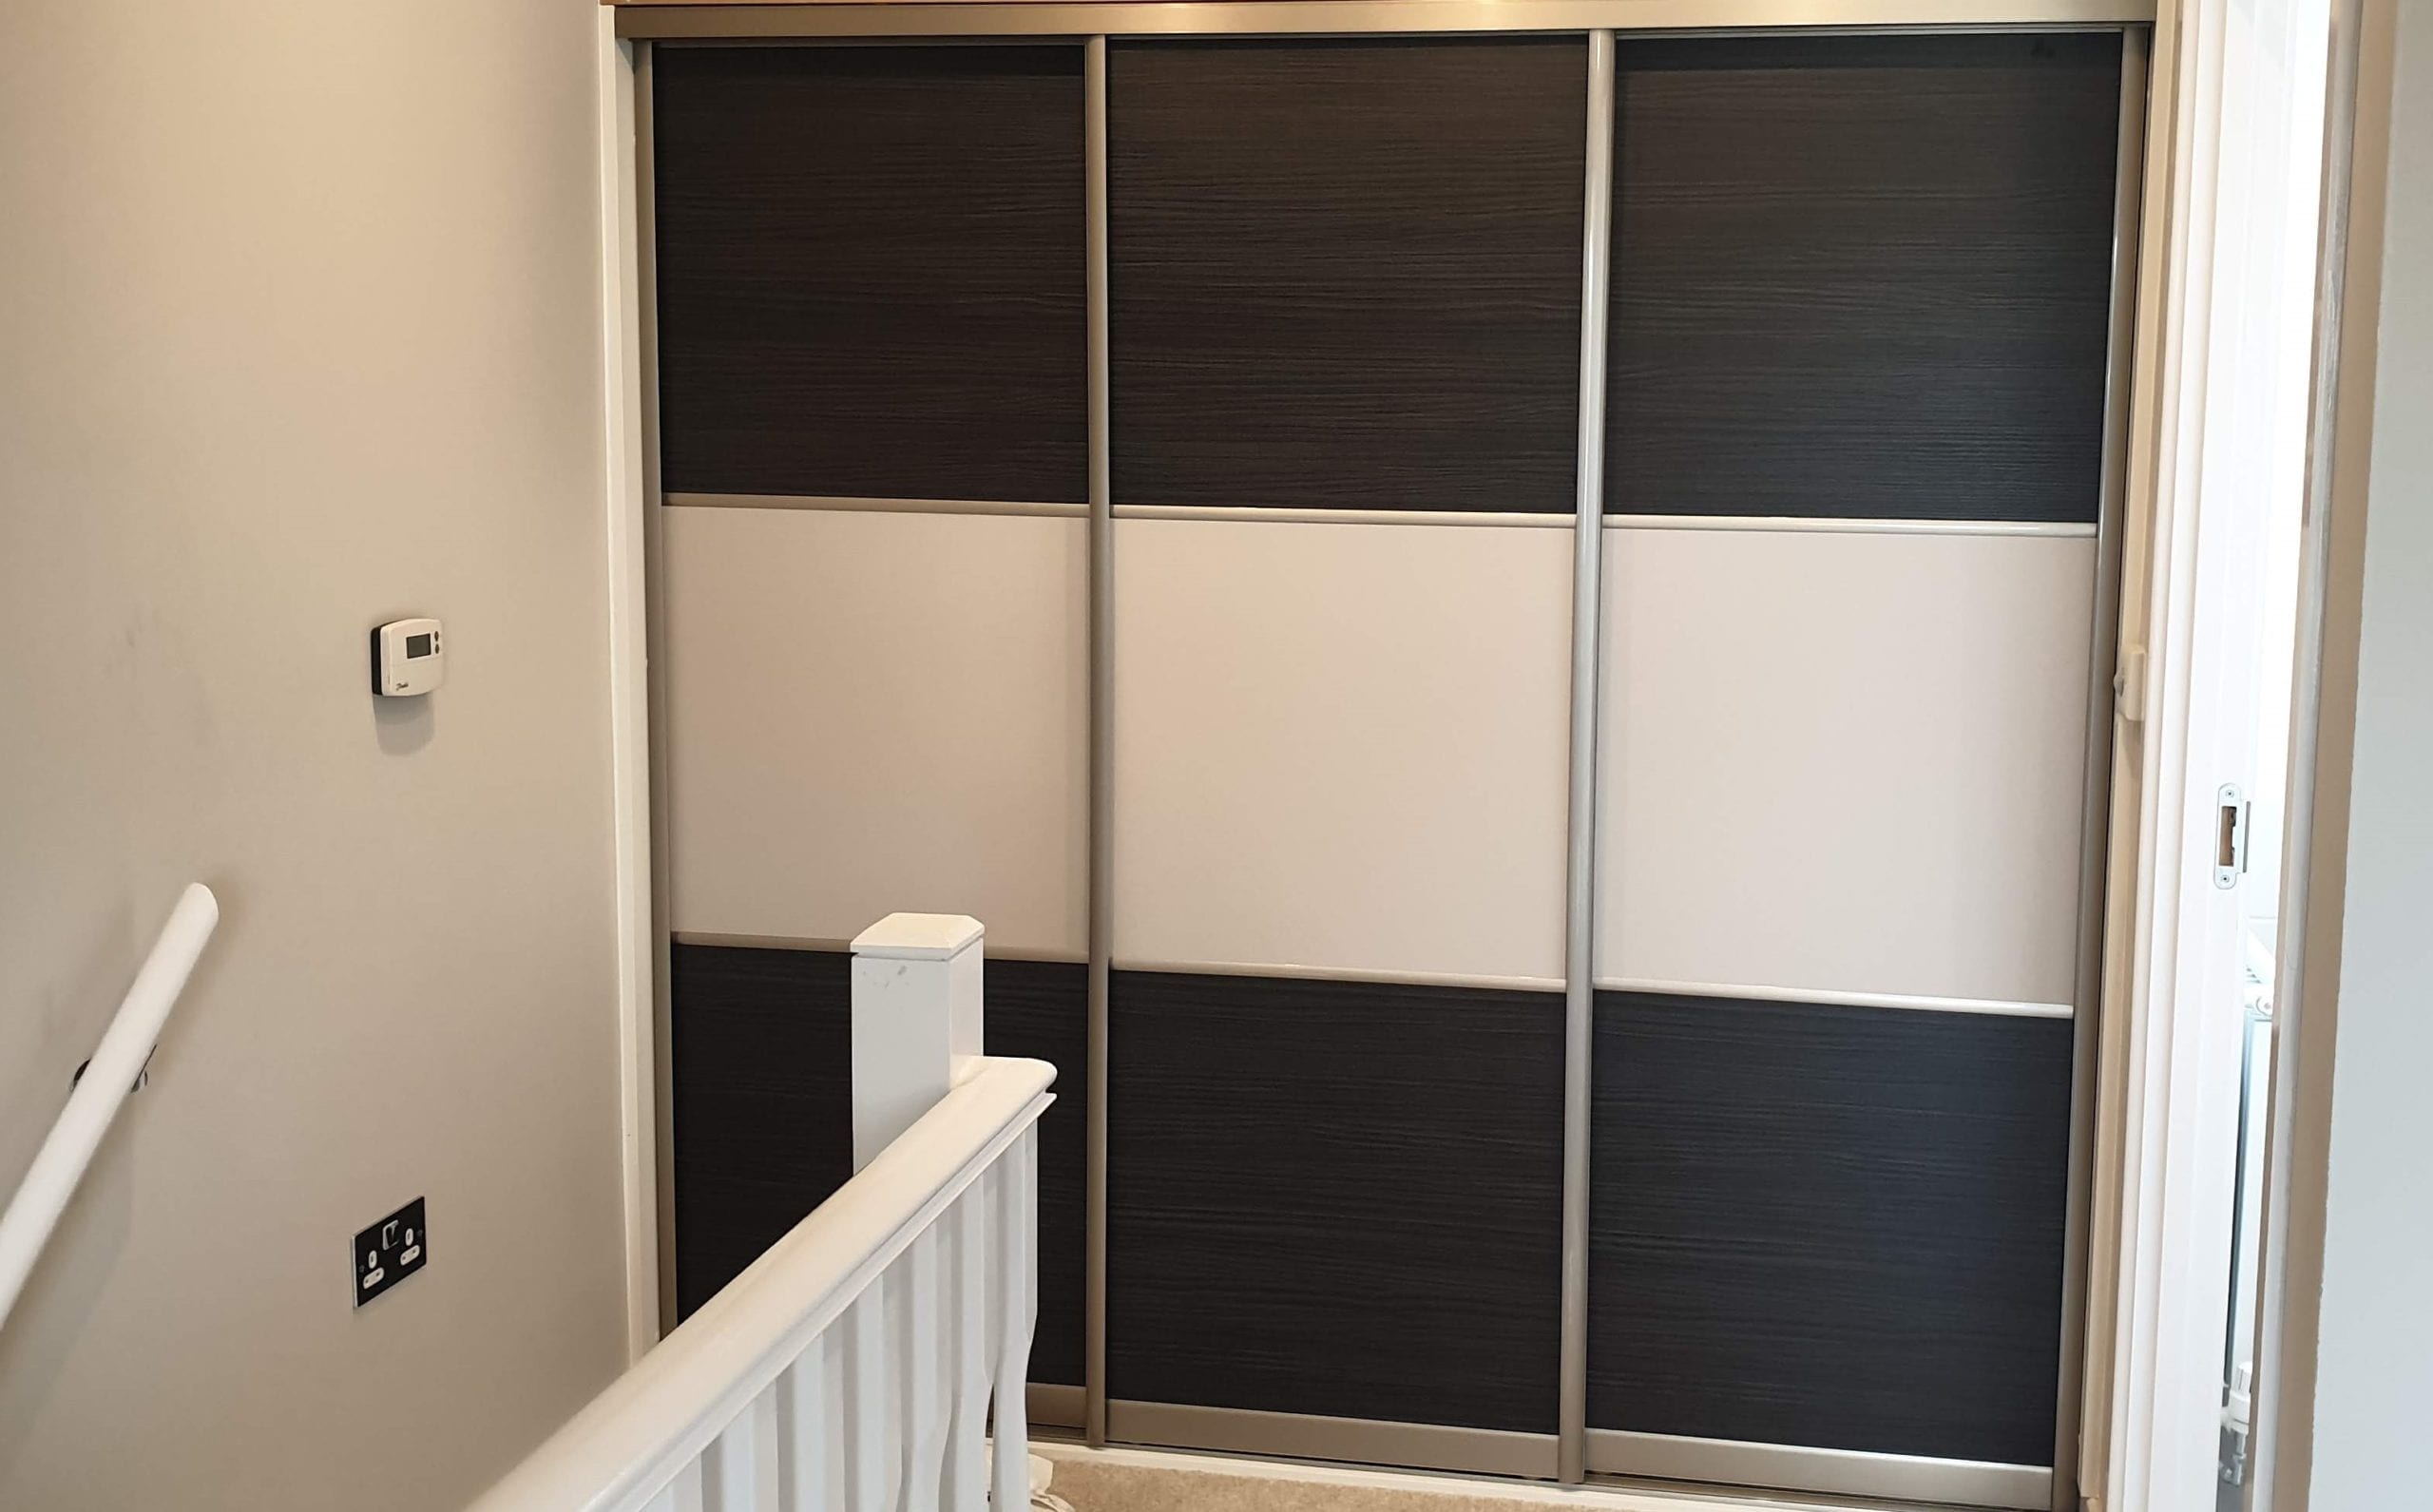 Sliding door wardrobe for the bedroom with sloped ceilng